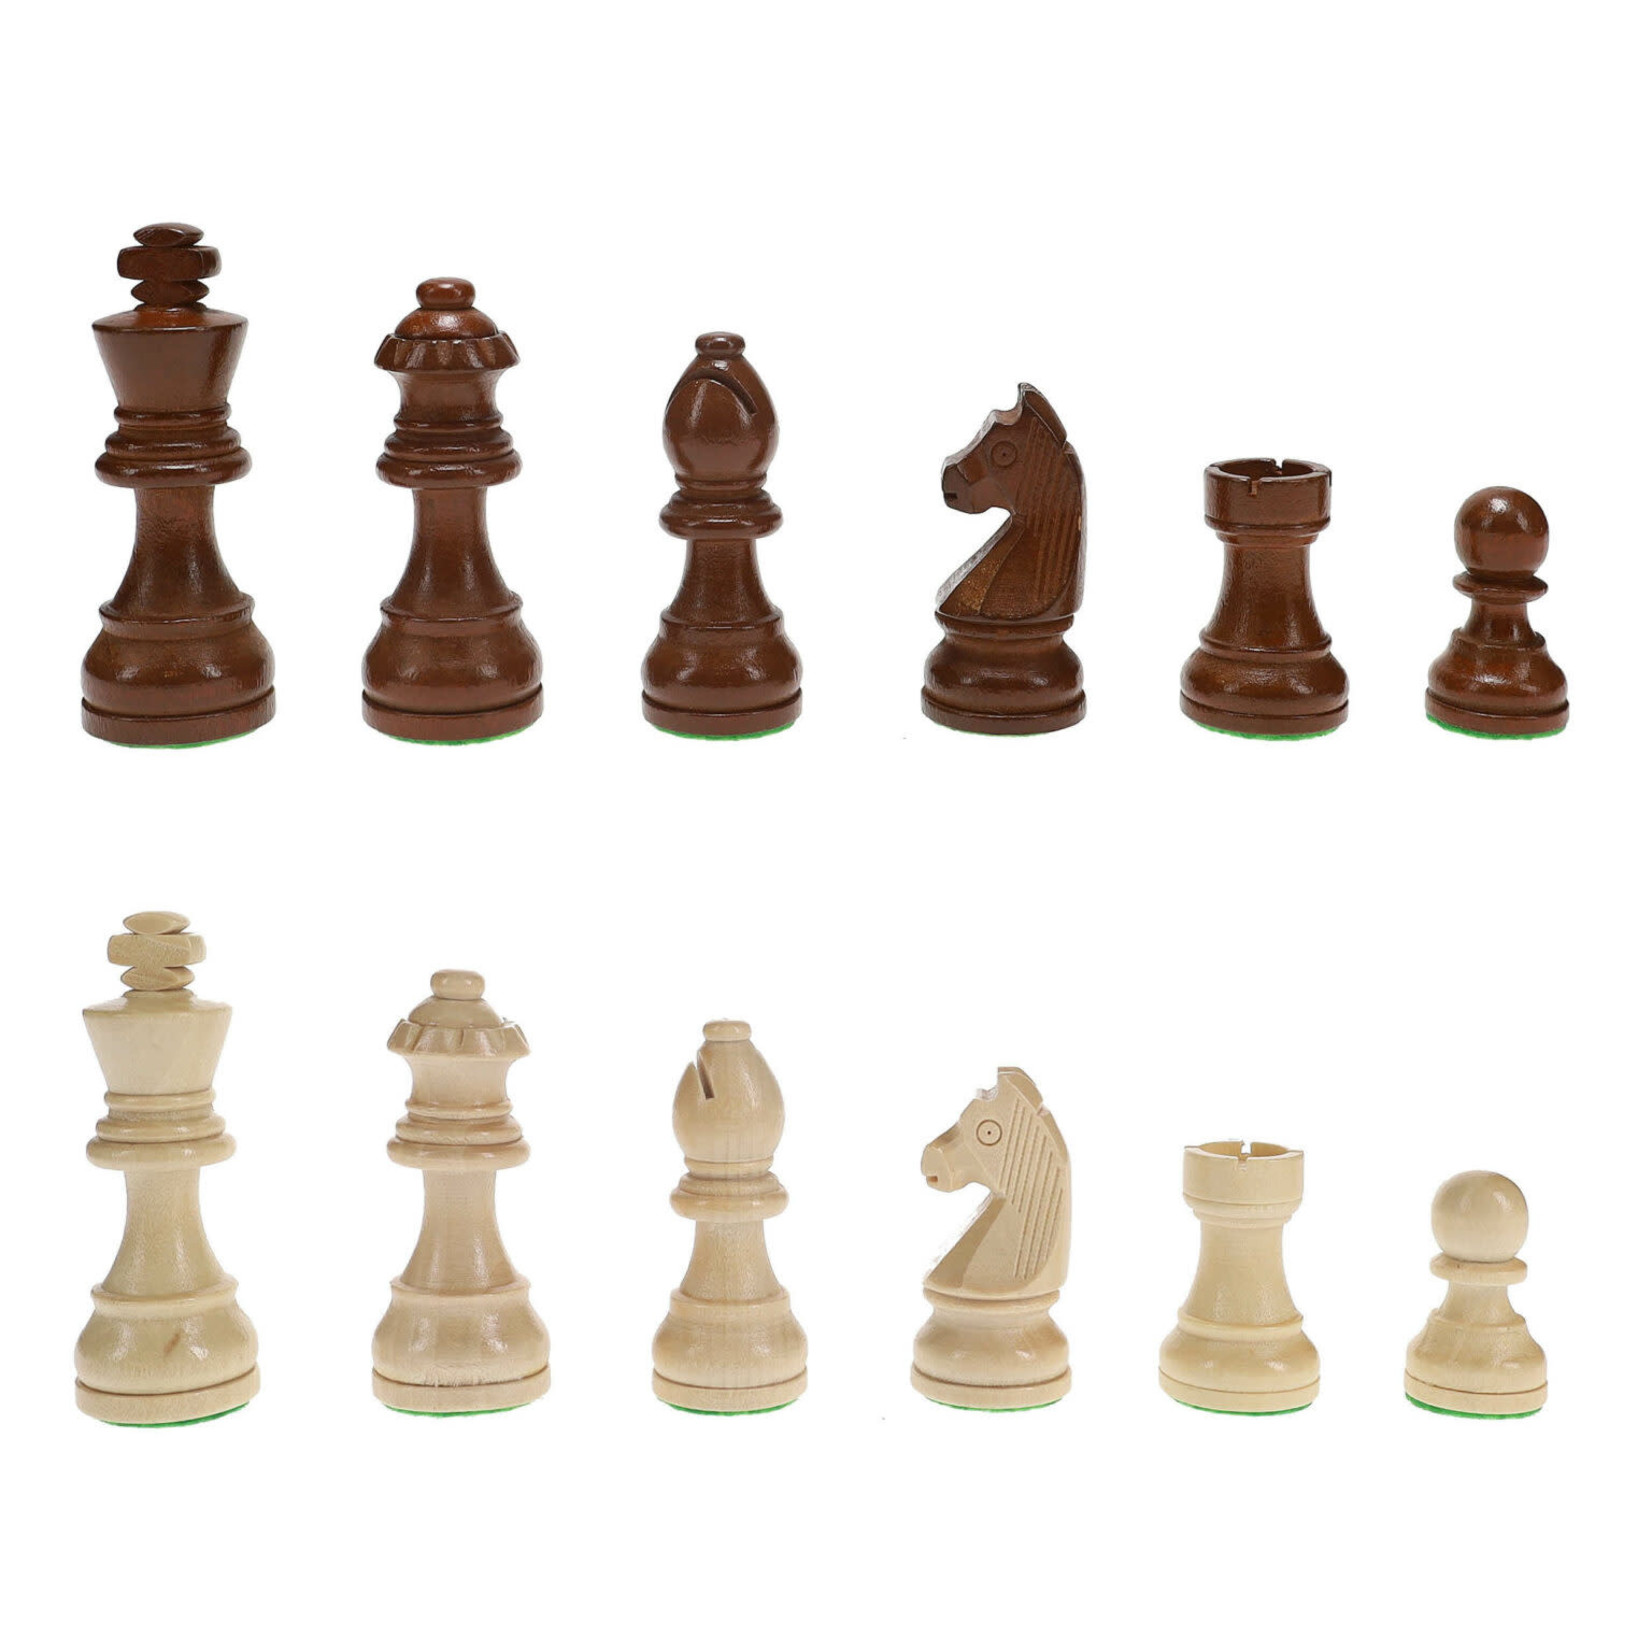 Wood Expressions Staunton-Style Chess Pieces (Brown & Natural Wood; 3" King)